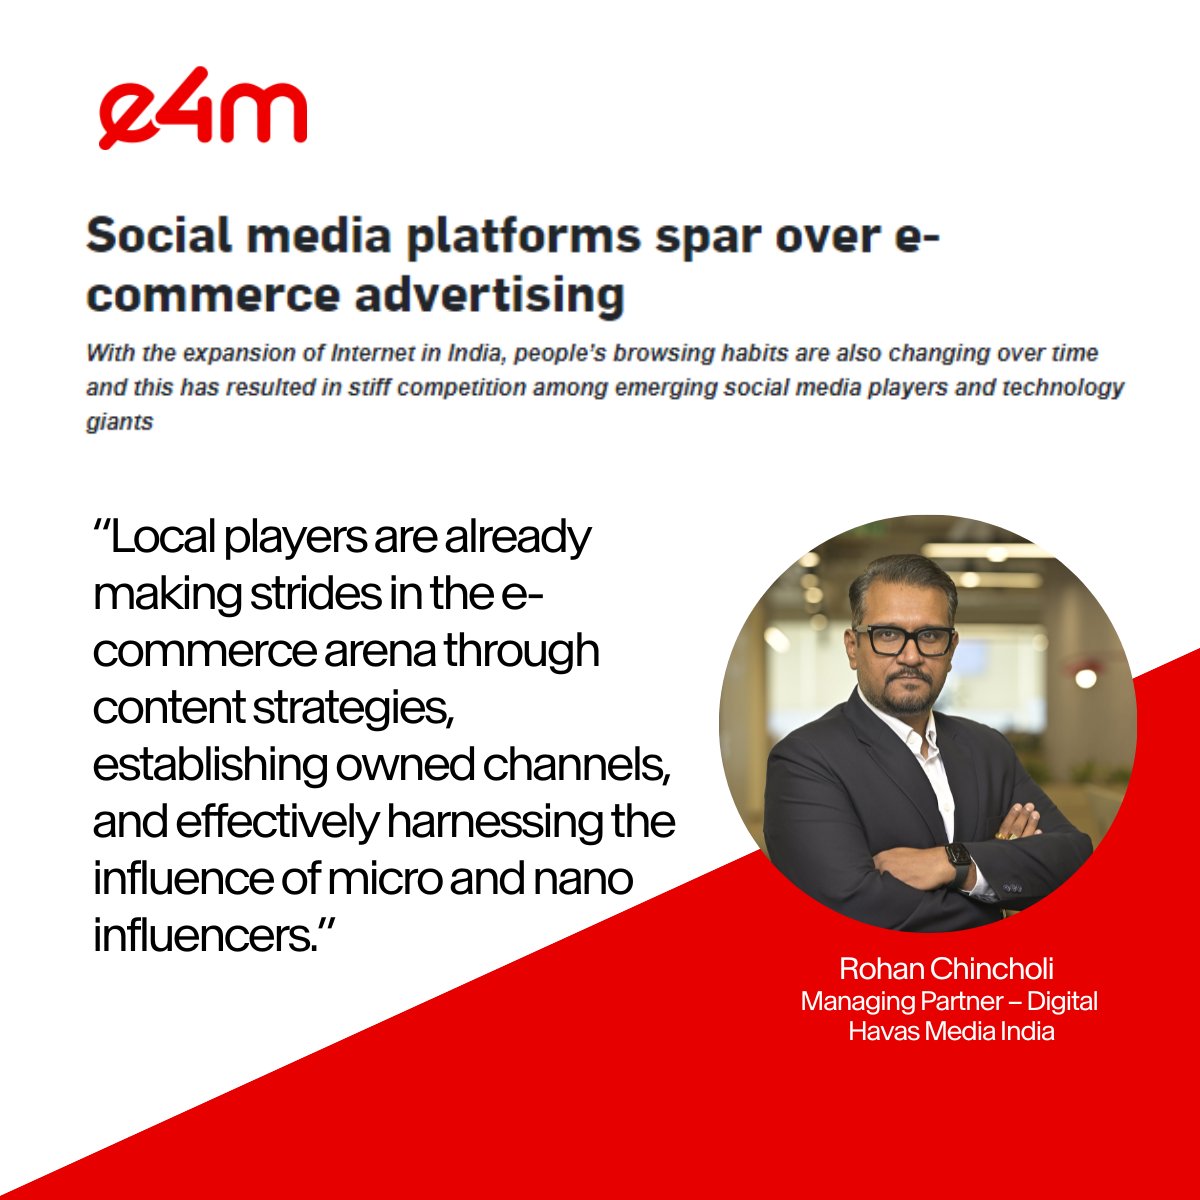 @IamCRK, Managing Partner #Digital #HavasMediaIndia discusses the changing face of Indian eCommerce ad landscape vis-à-vis consumers’ evolving browsing preferences. Read what it means for marketers in this @e4mtweets feature: surl.li/mnlbv #MeaningfulConversations